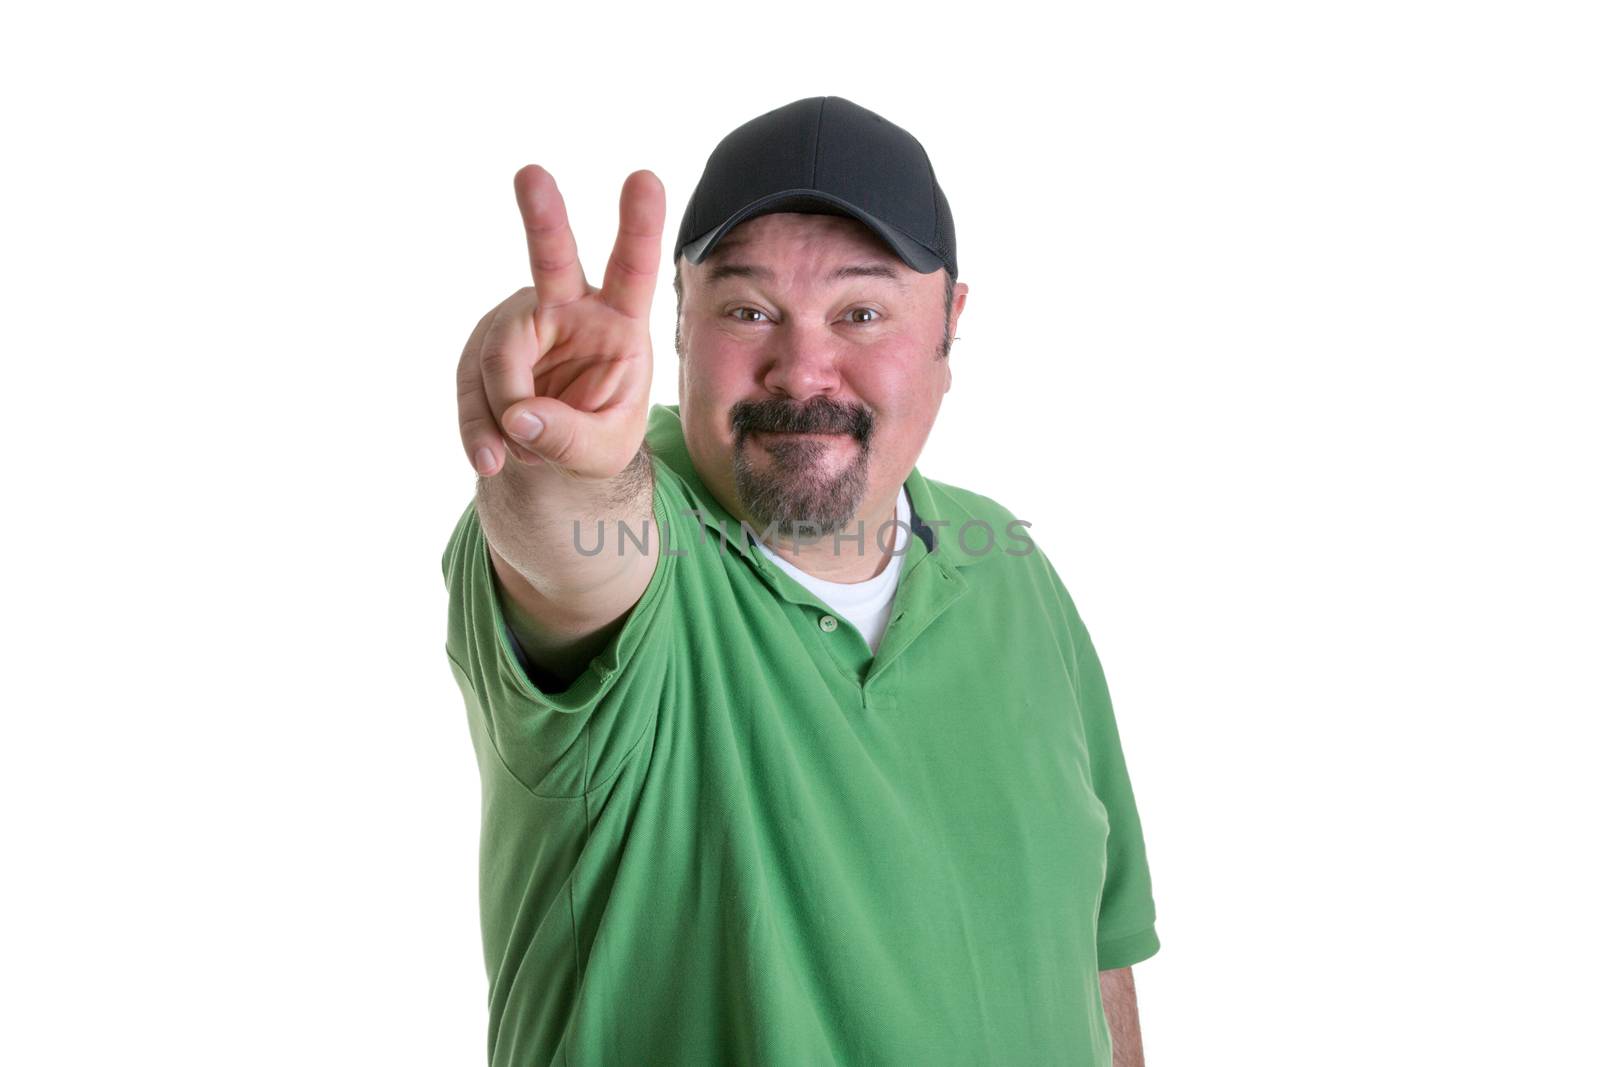 Portrait of Overweight Man with Goatee Wearing Green Shirt and Black Baseball Cap Smiling and Giving Peace Sign Hand Gesture Toward Camera, on White Background